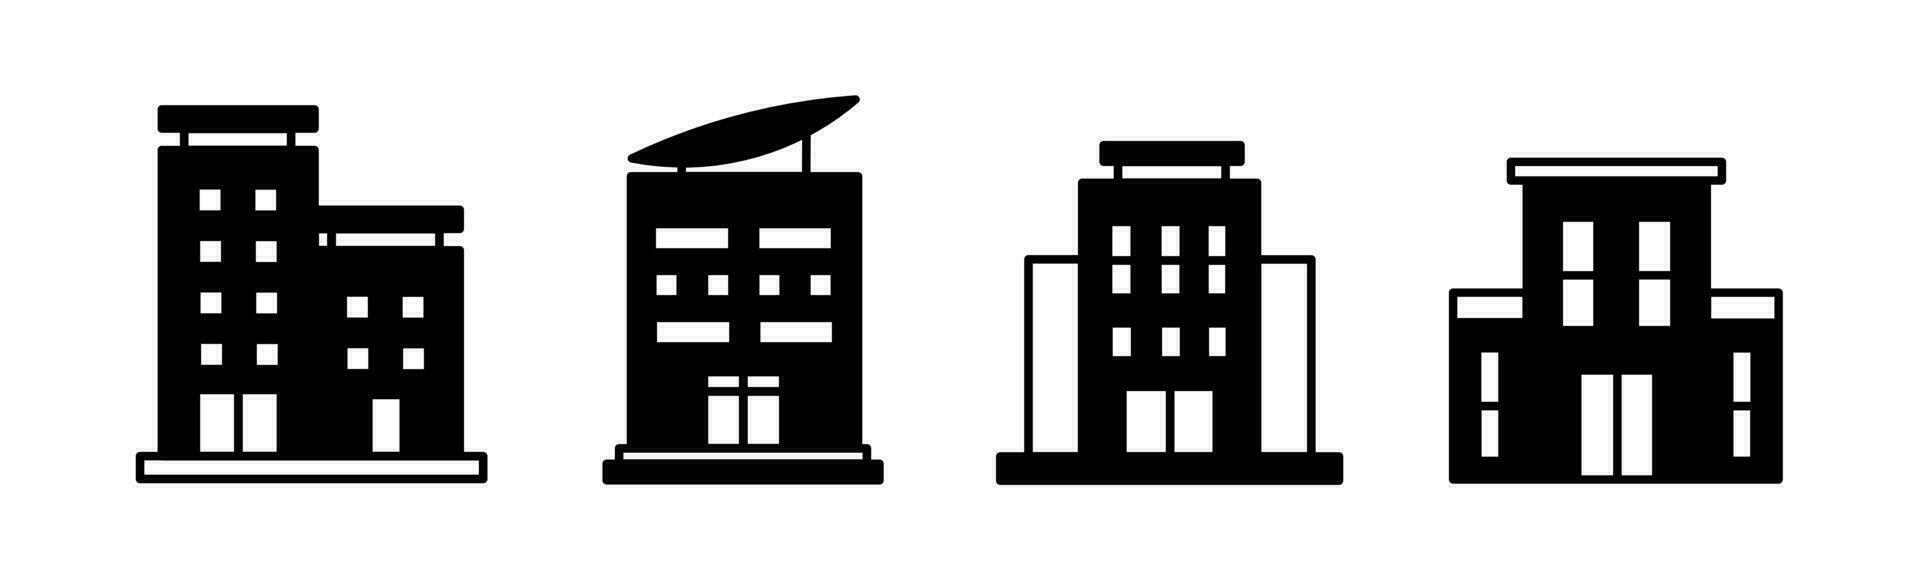 Building icon vector black and white Illustration design for business. Stock vector.